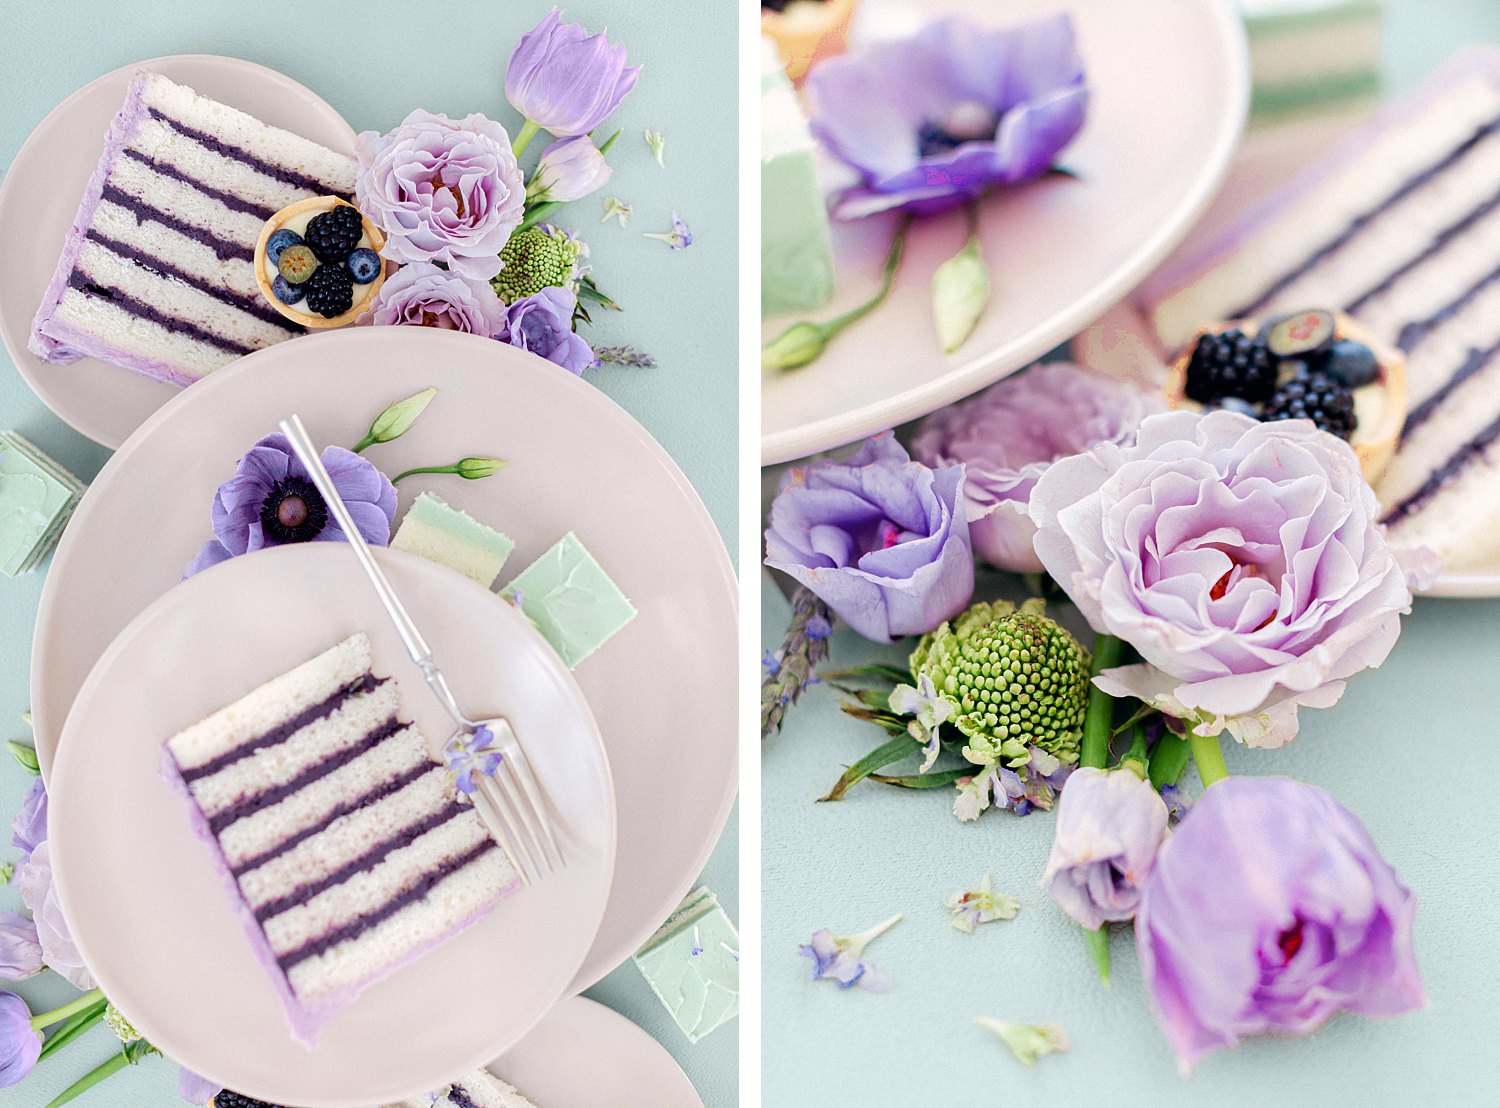 purple cake slices laying on plates with by purple florals against green background wedding flat lay